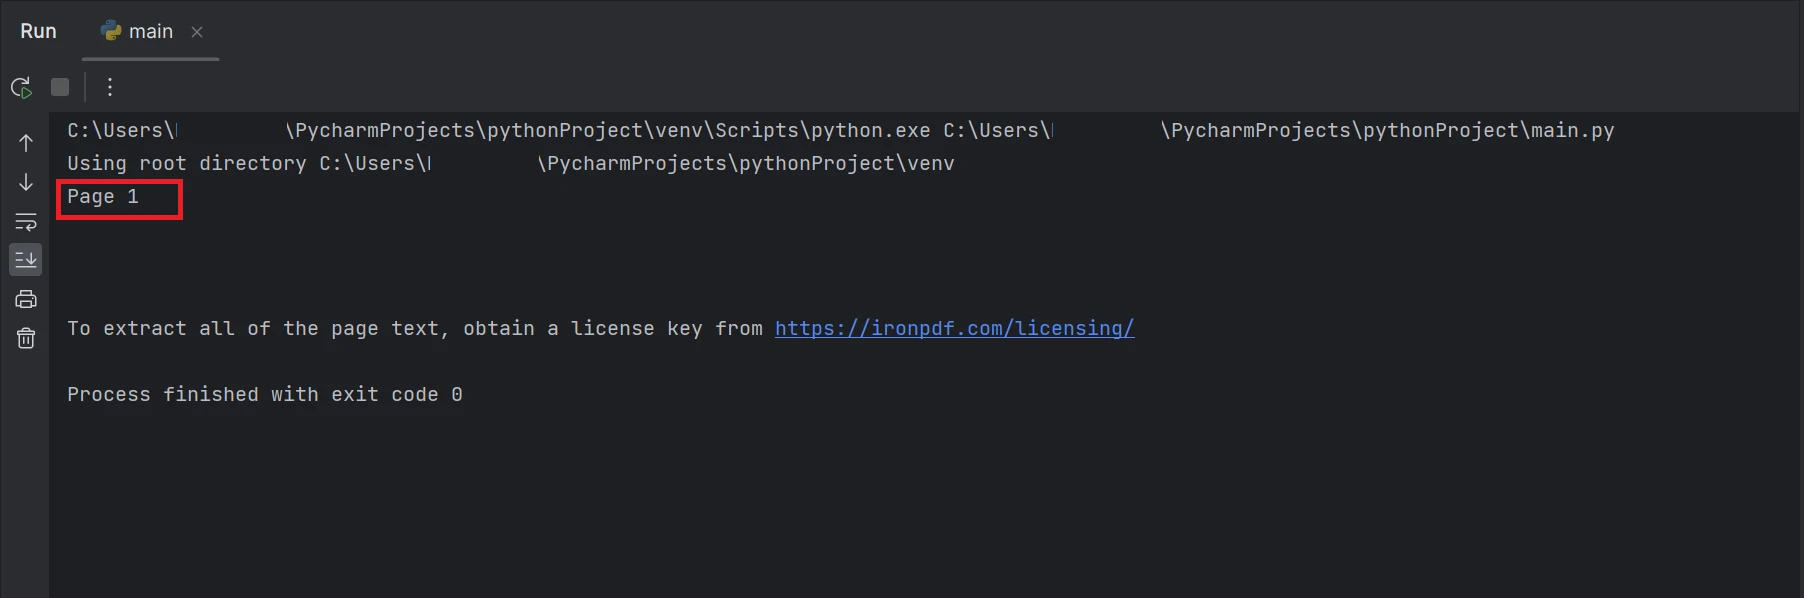 How to Parse A PDF File in Python: Figure 6 - A screenshot of the terminal with text output Page 1.